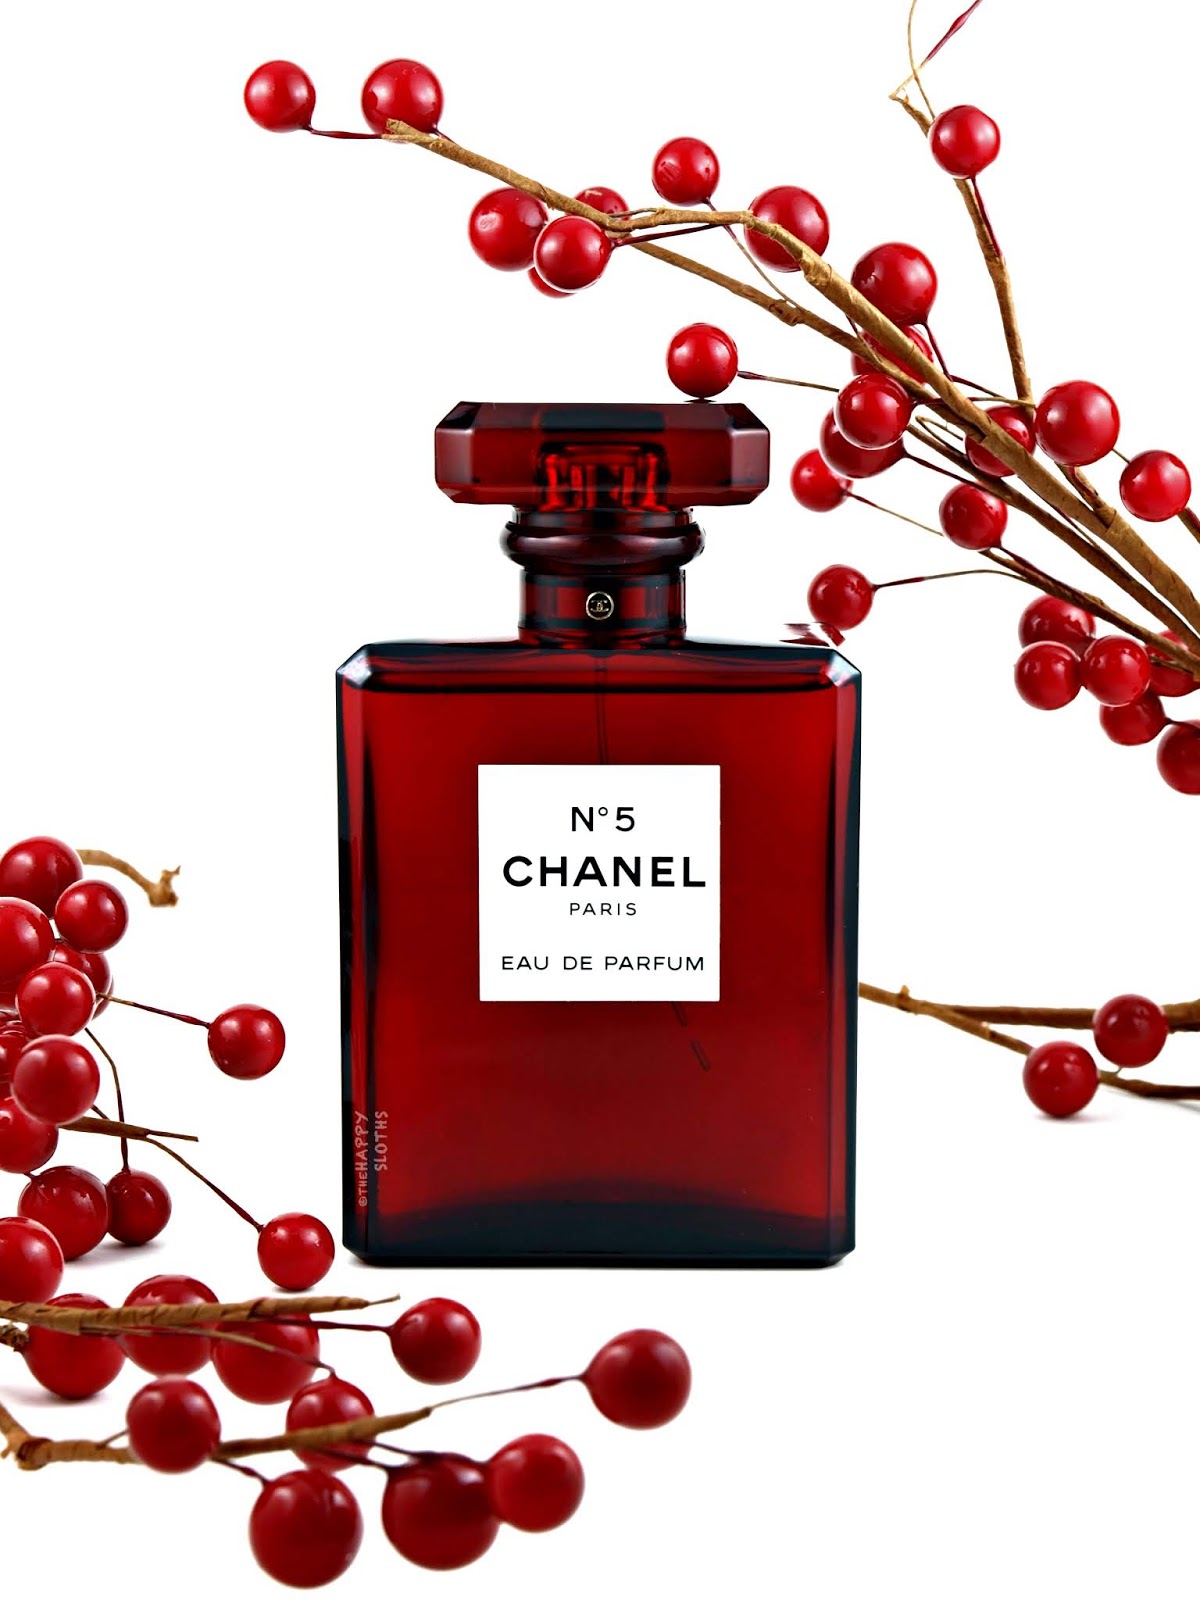 indtil nu sammentrækning gå Chanel | Holiday 2018 N°5 Eau de Parfum Red Edition: Review | The Happy  Sloths: Beauty, Makeup, and Skincare Blog with Reviews and Swatches